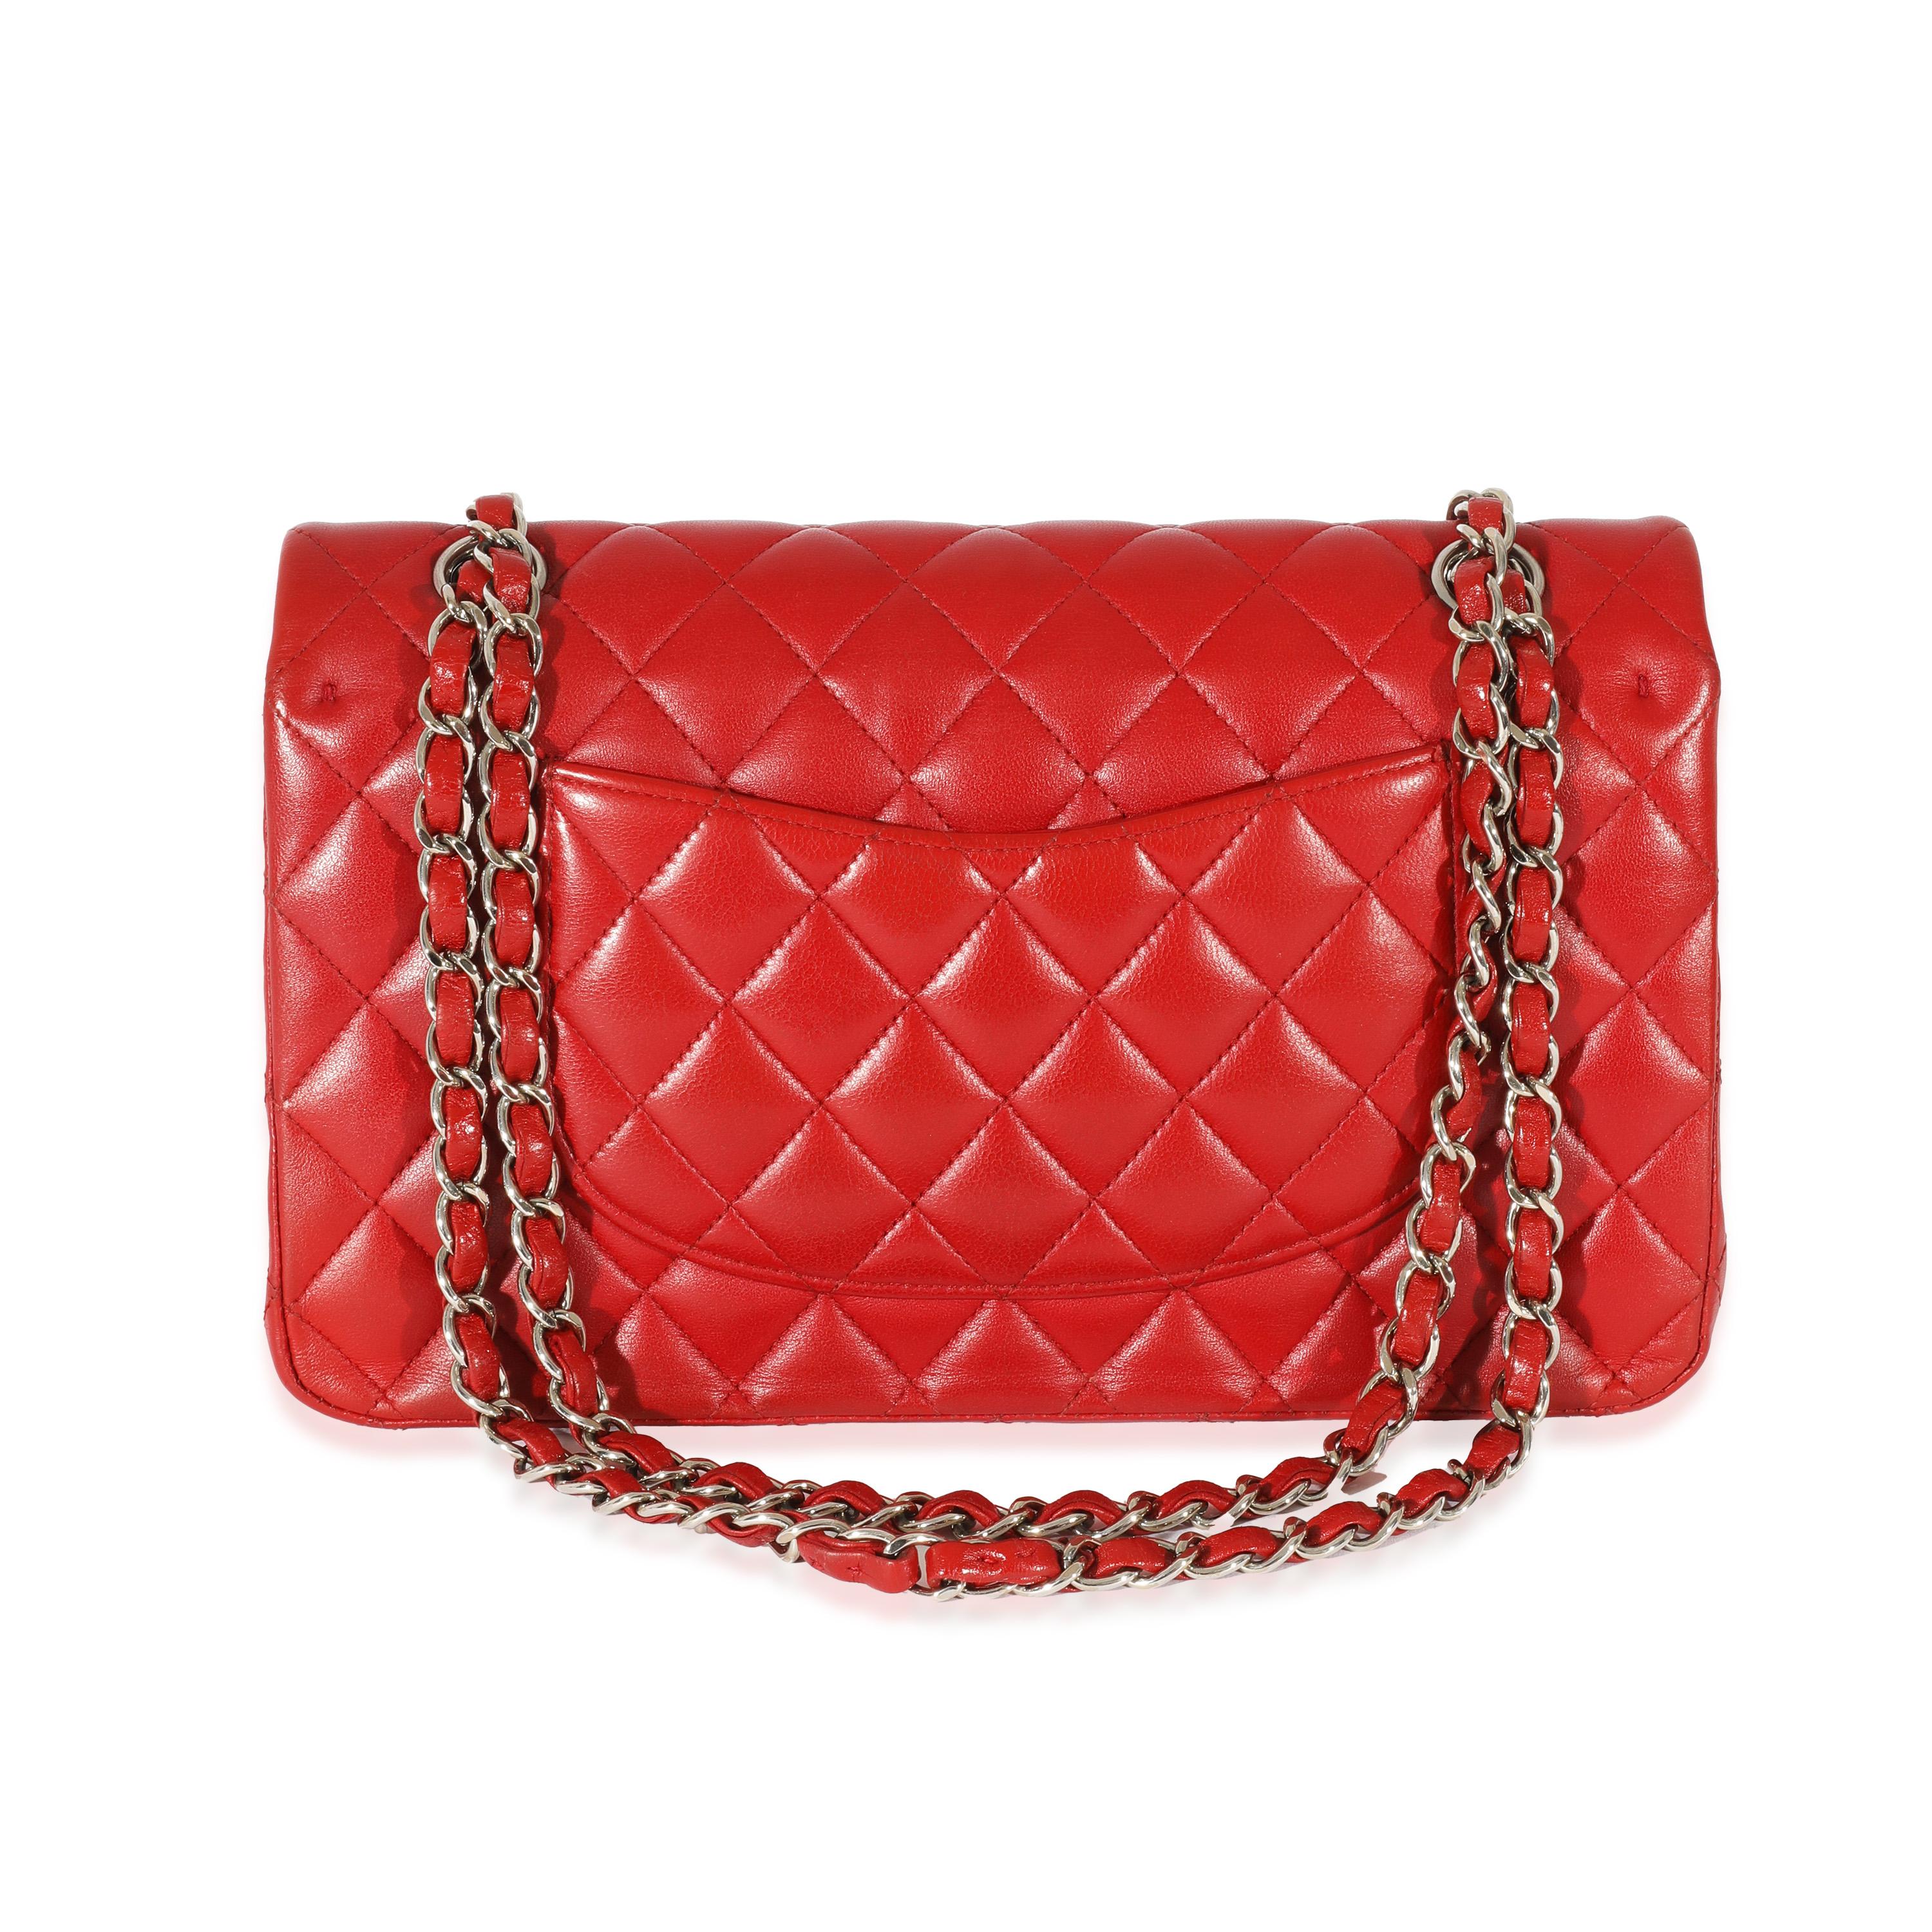 Chanel Red Quilted Lambskin Medium Classic Double Flap Bag In Excellent Condition For Sale In New York, NY